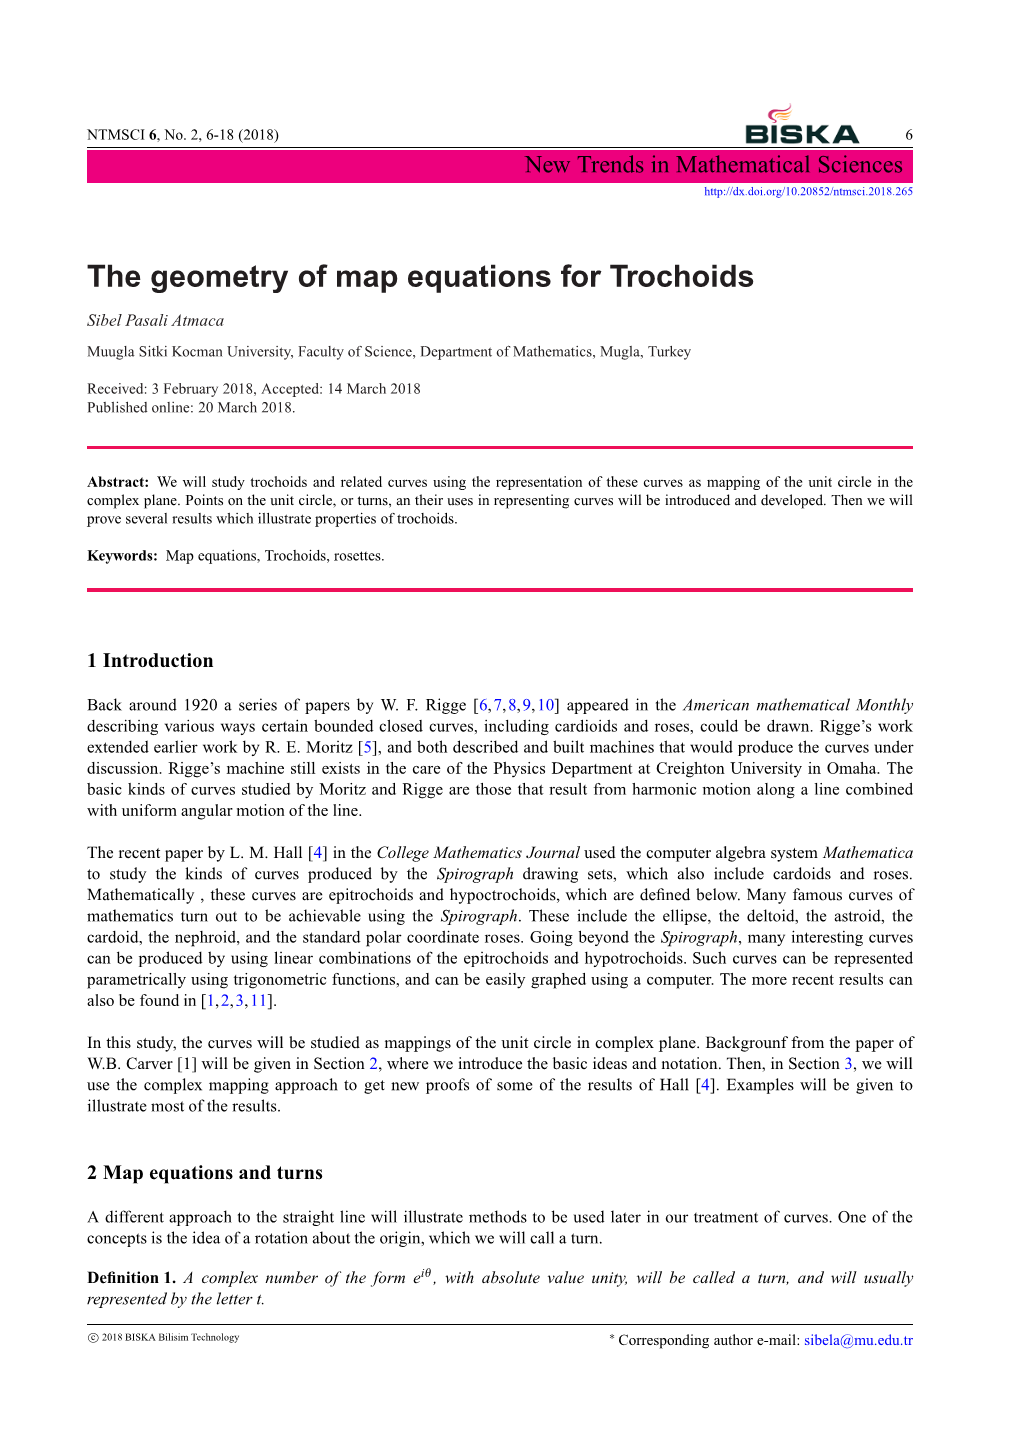 The Geometry of Map Equations for Trochoids